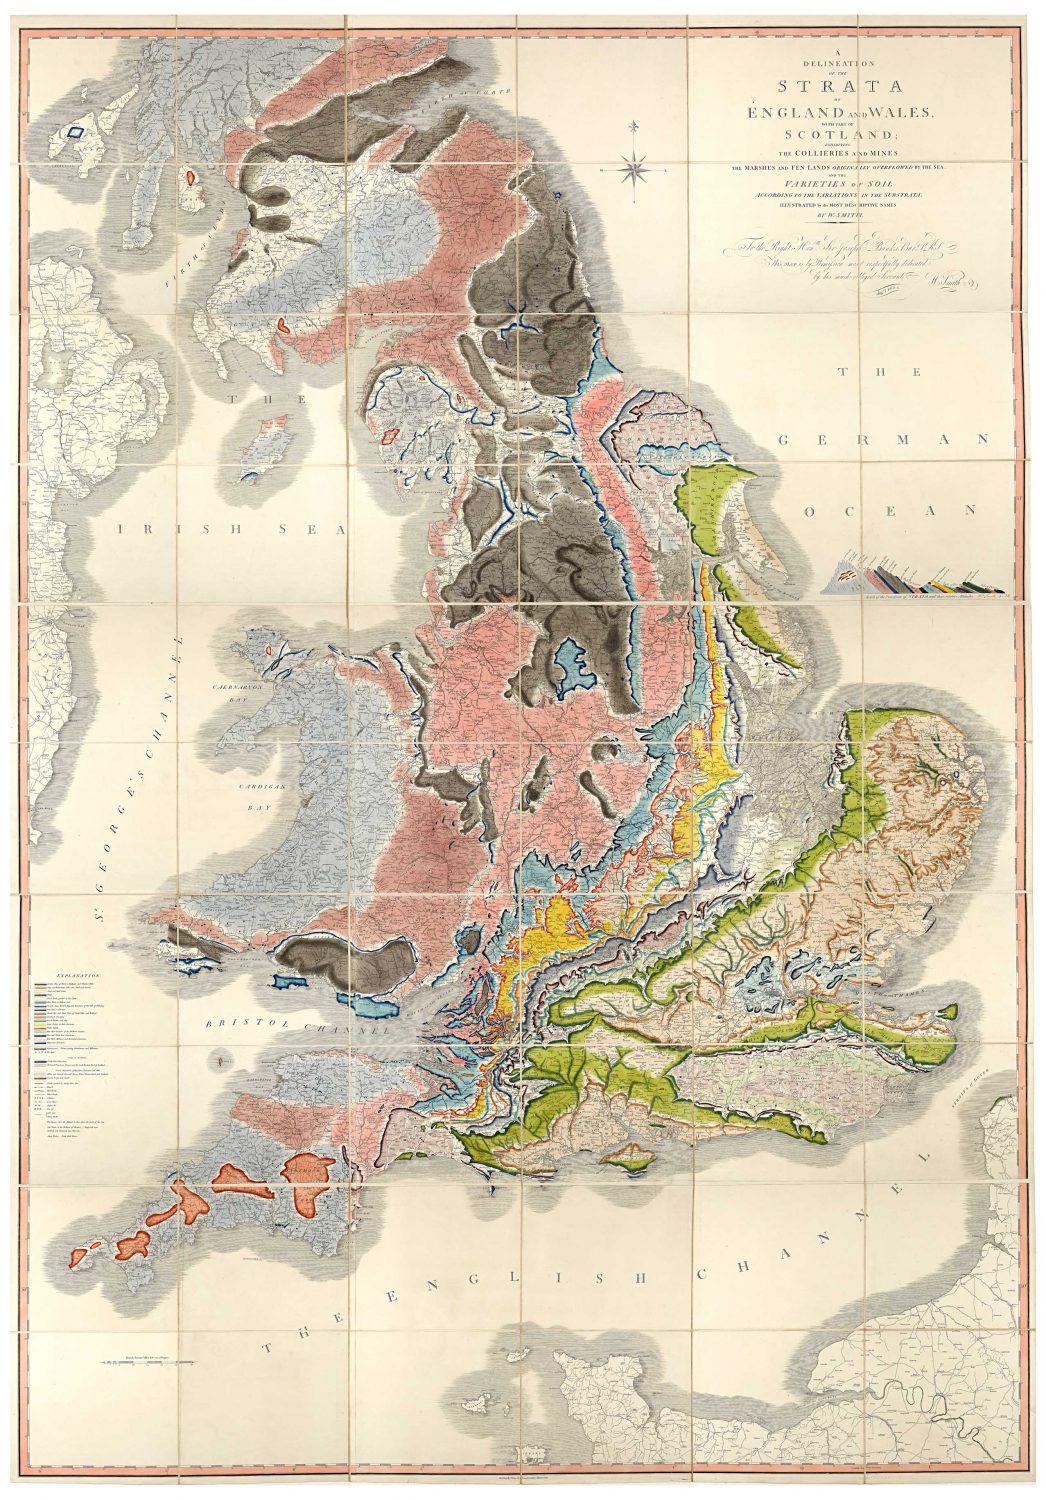 William Smith's geology map